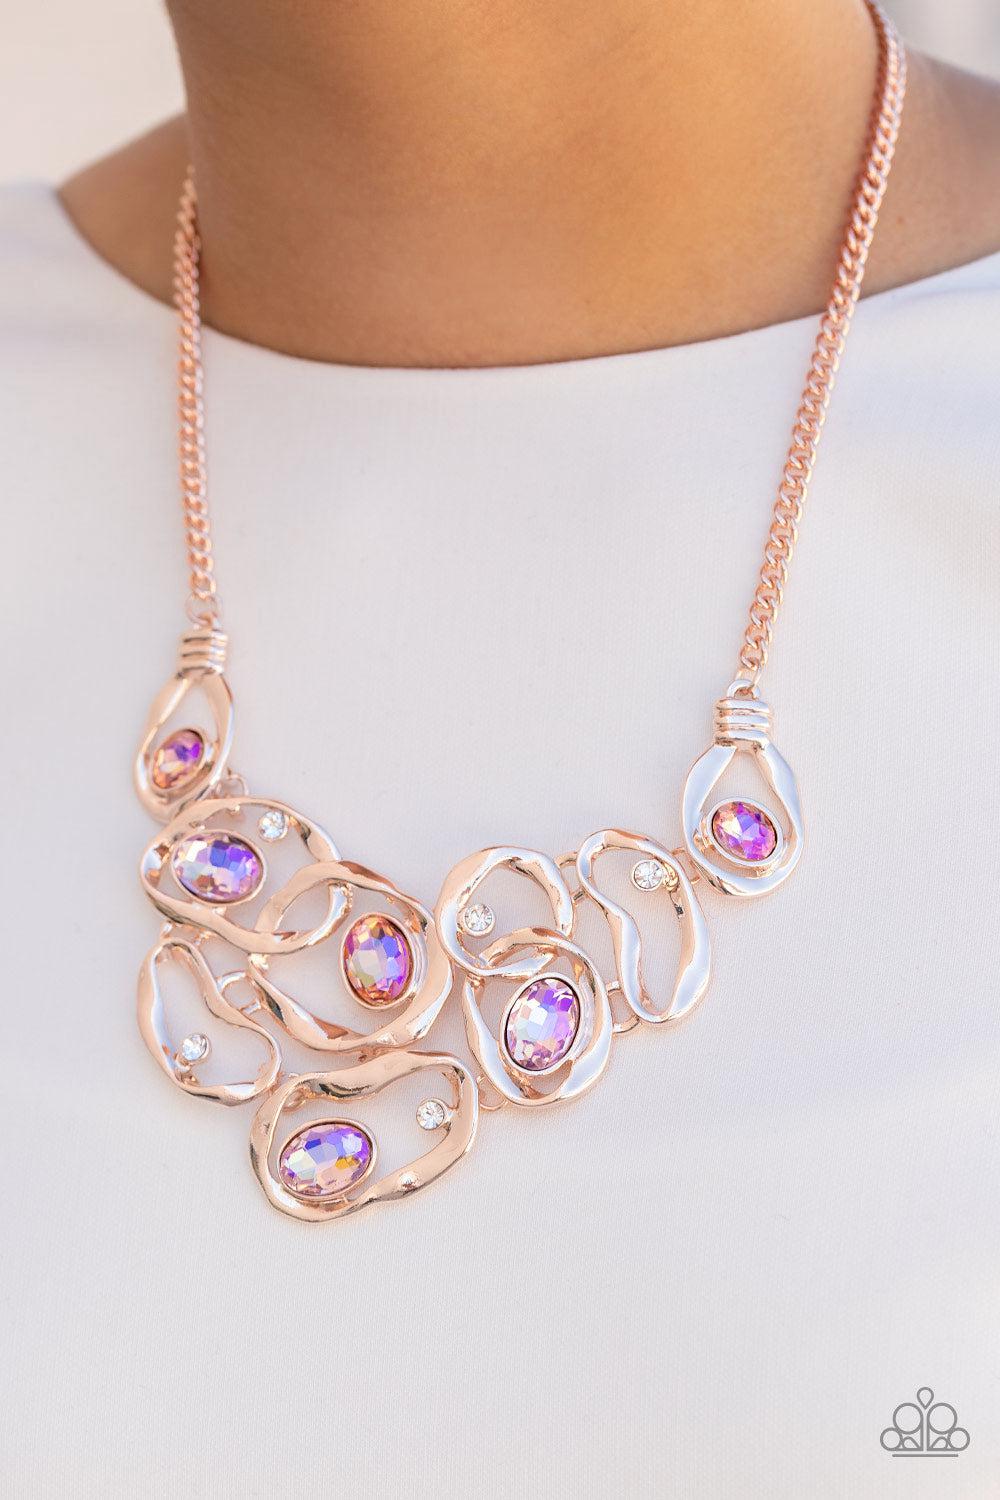 Warp Speed Rose Gold and Iridescent Rhinestone Necklace - Paparazzi Accessories- lightbox - CarasShop.com - $5 Jewelry by Cara Jewels